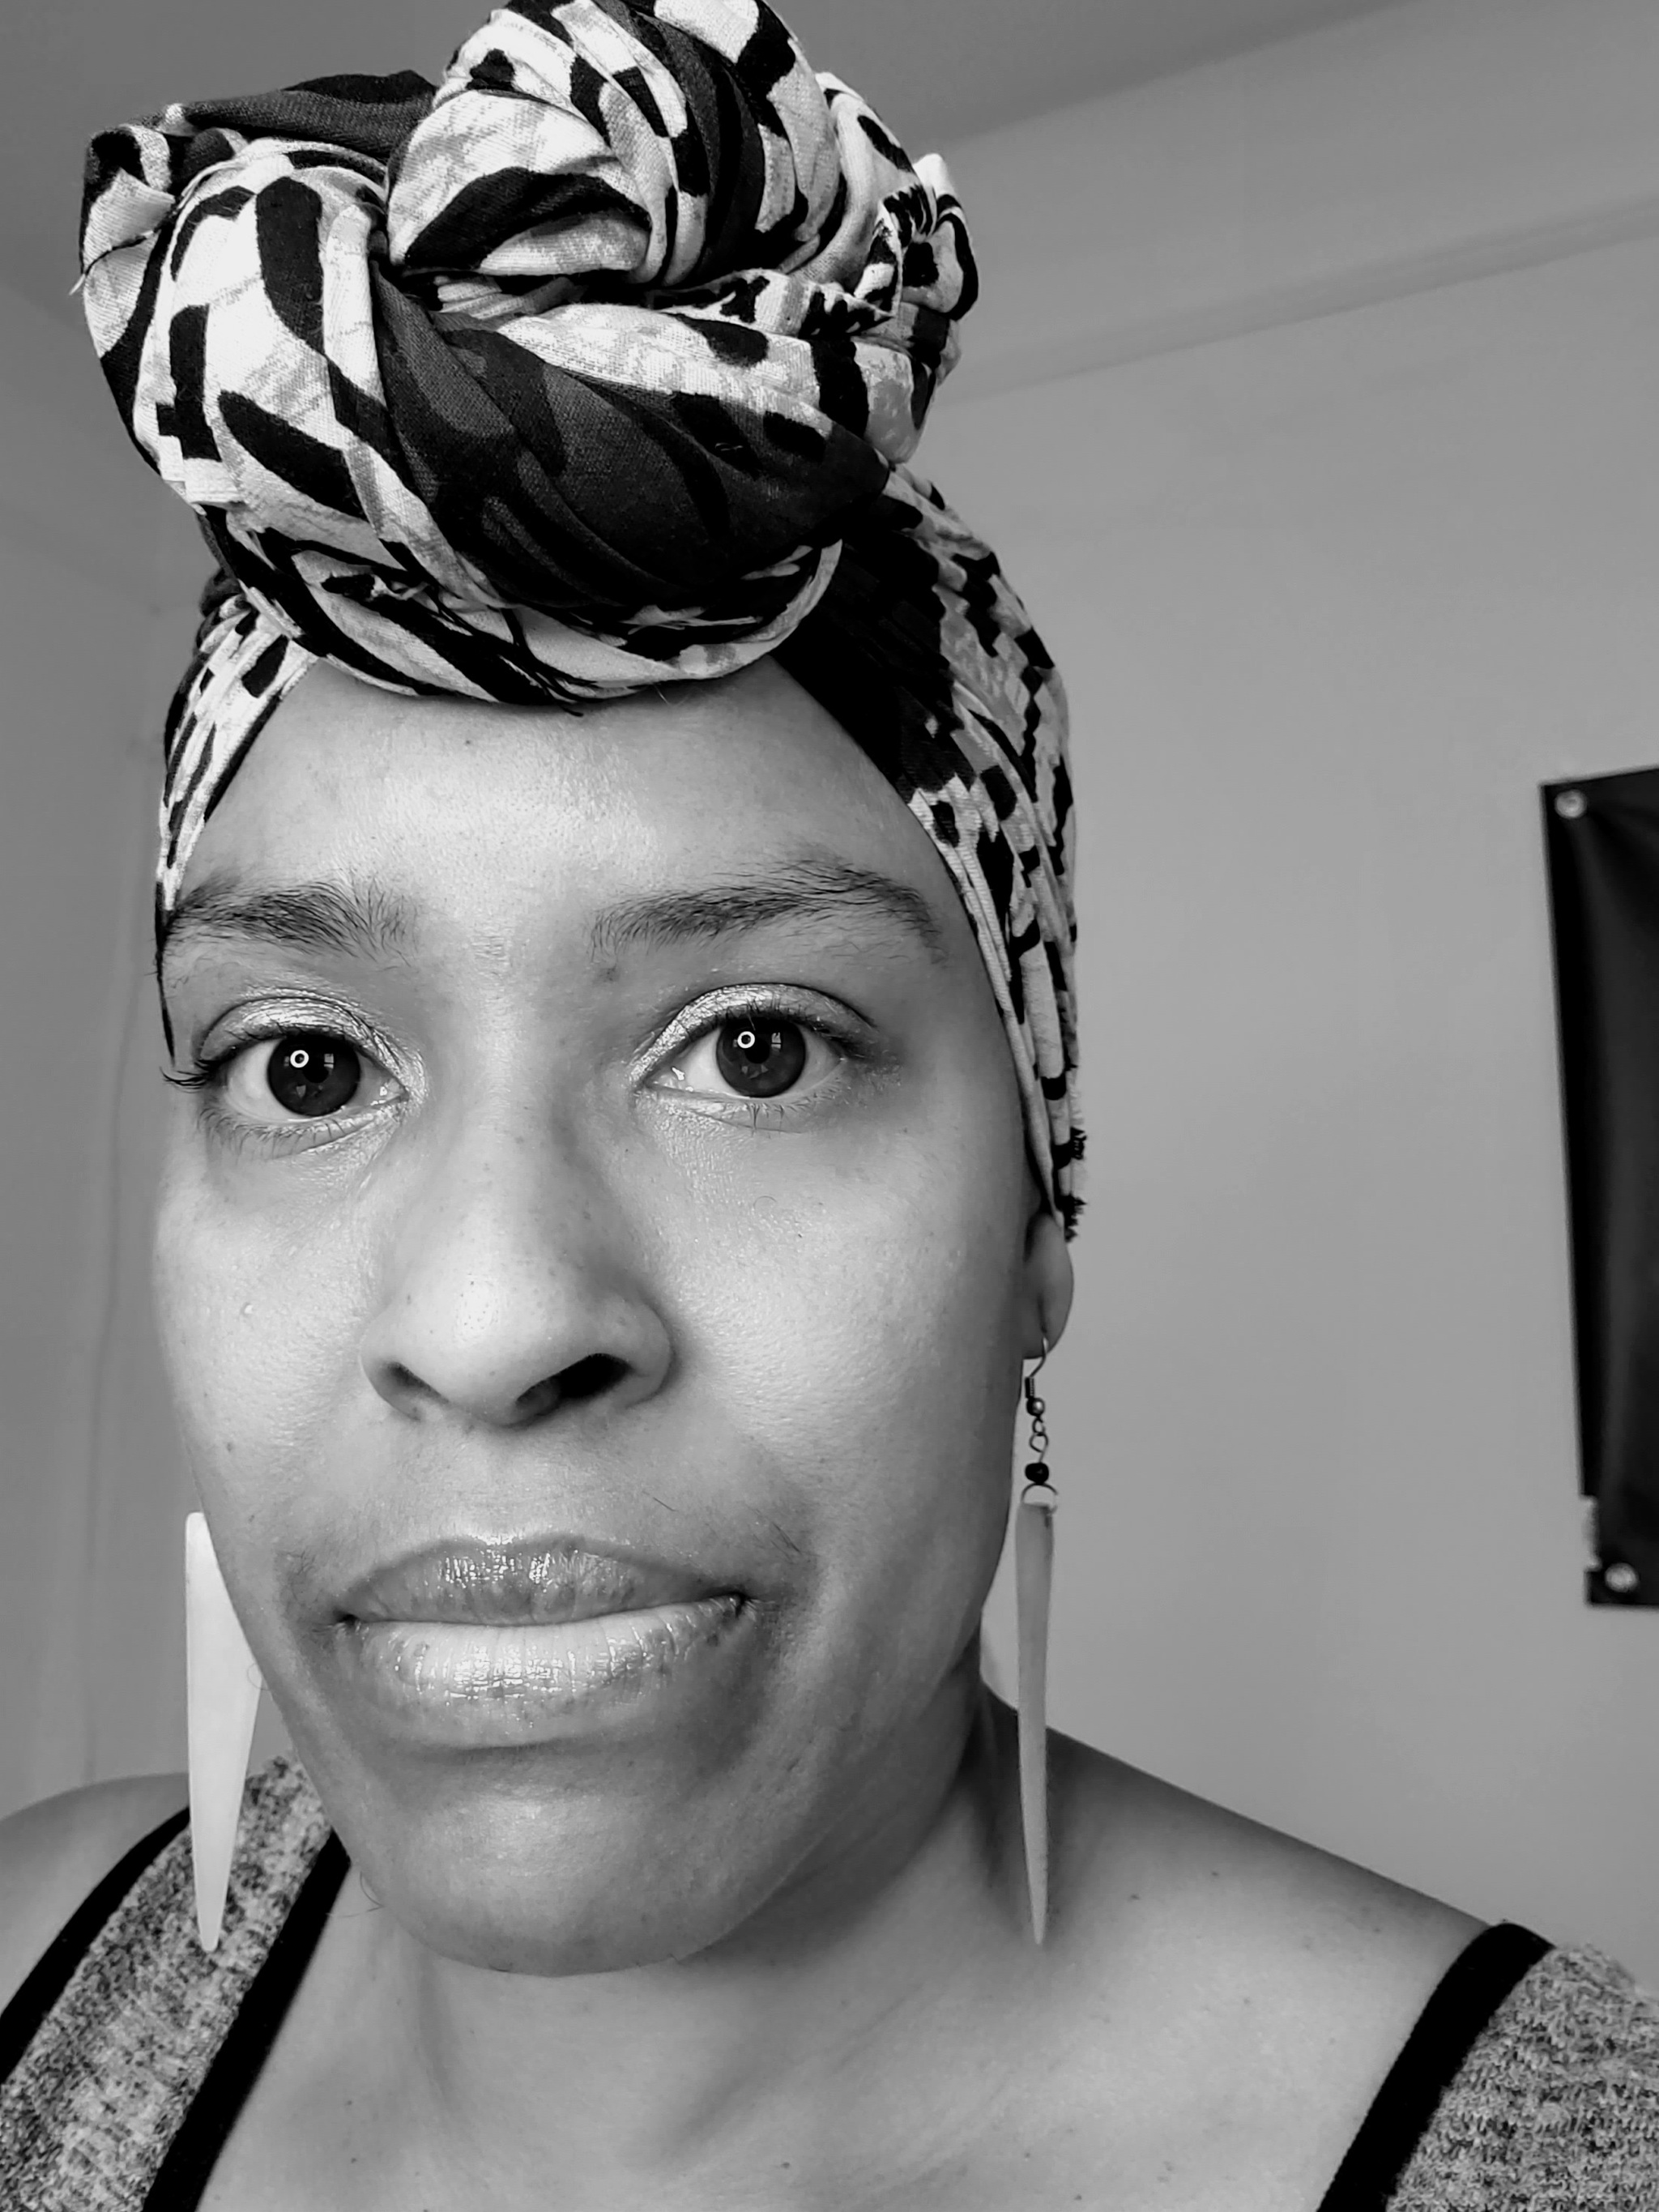 A Black woman looks into the camera with a neutral expression. She wears a headscarf knotted above her forehead and long, narrow triangle-shaped earrings.